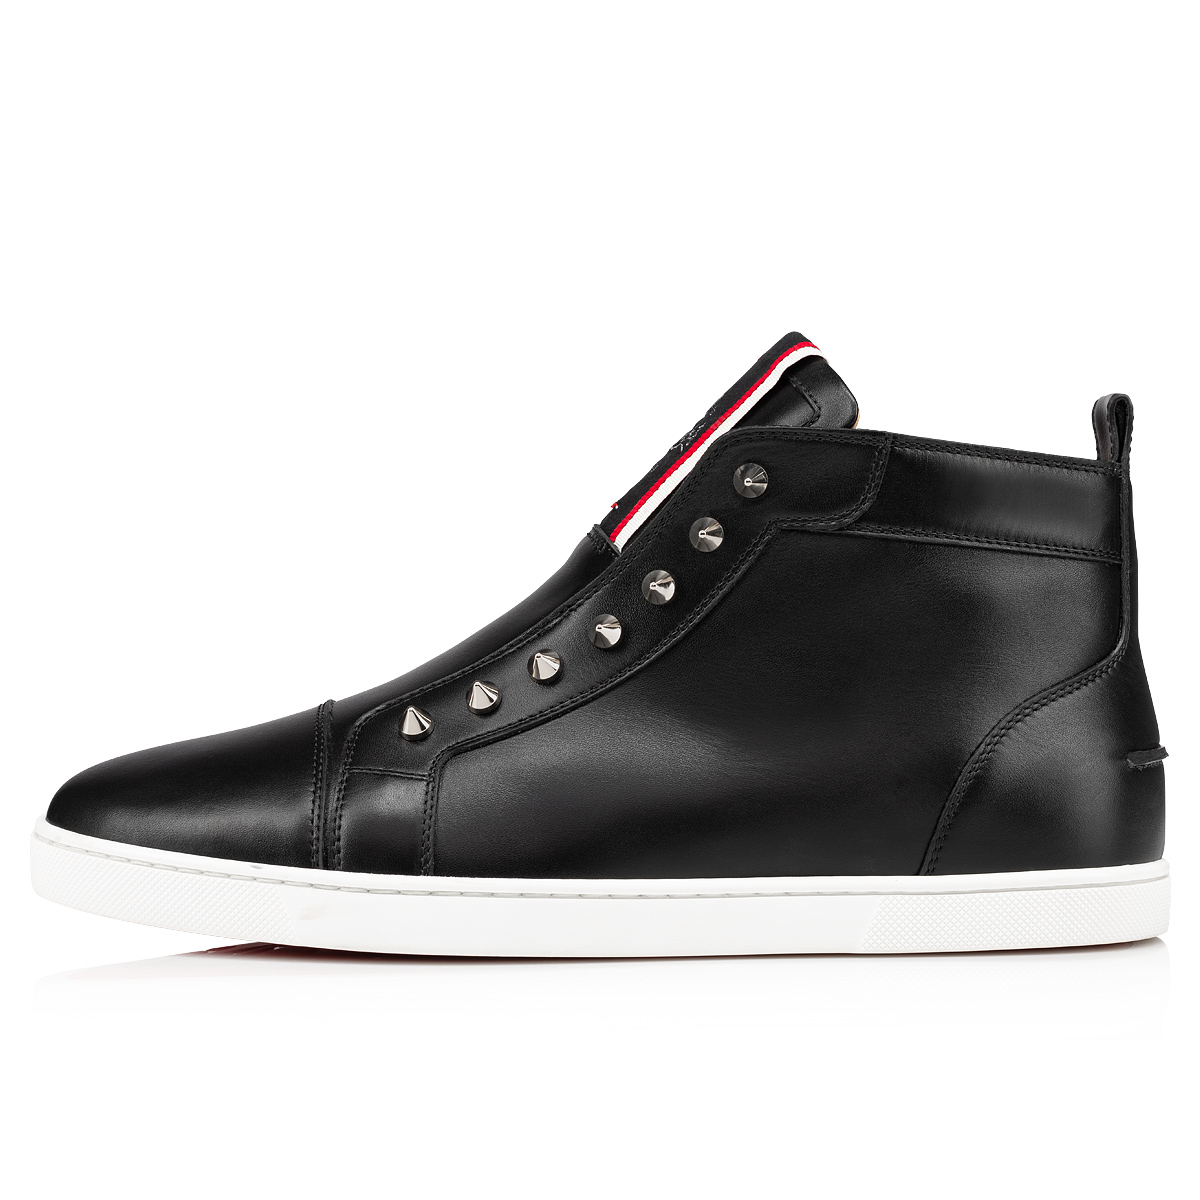 F.A.V Fique A Vontade Mid Cut - High-top sneakers - Calf leather - Black - Christian  Louboutin